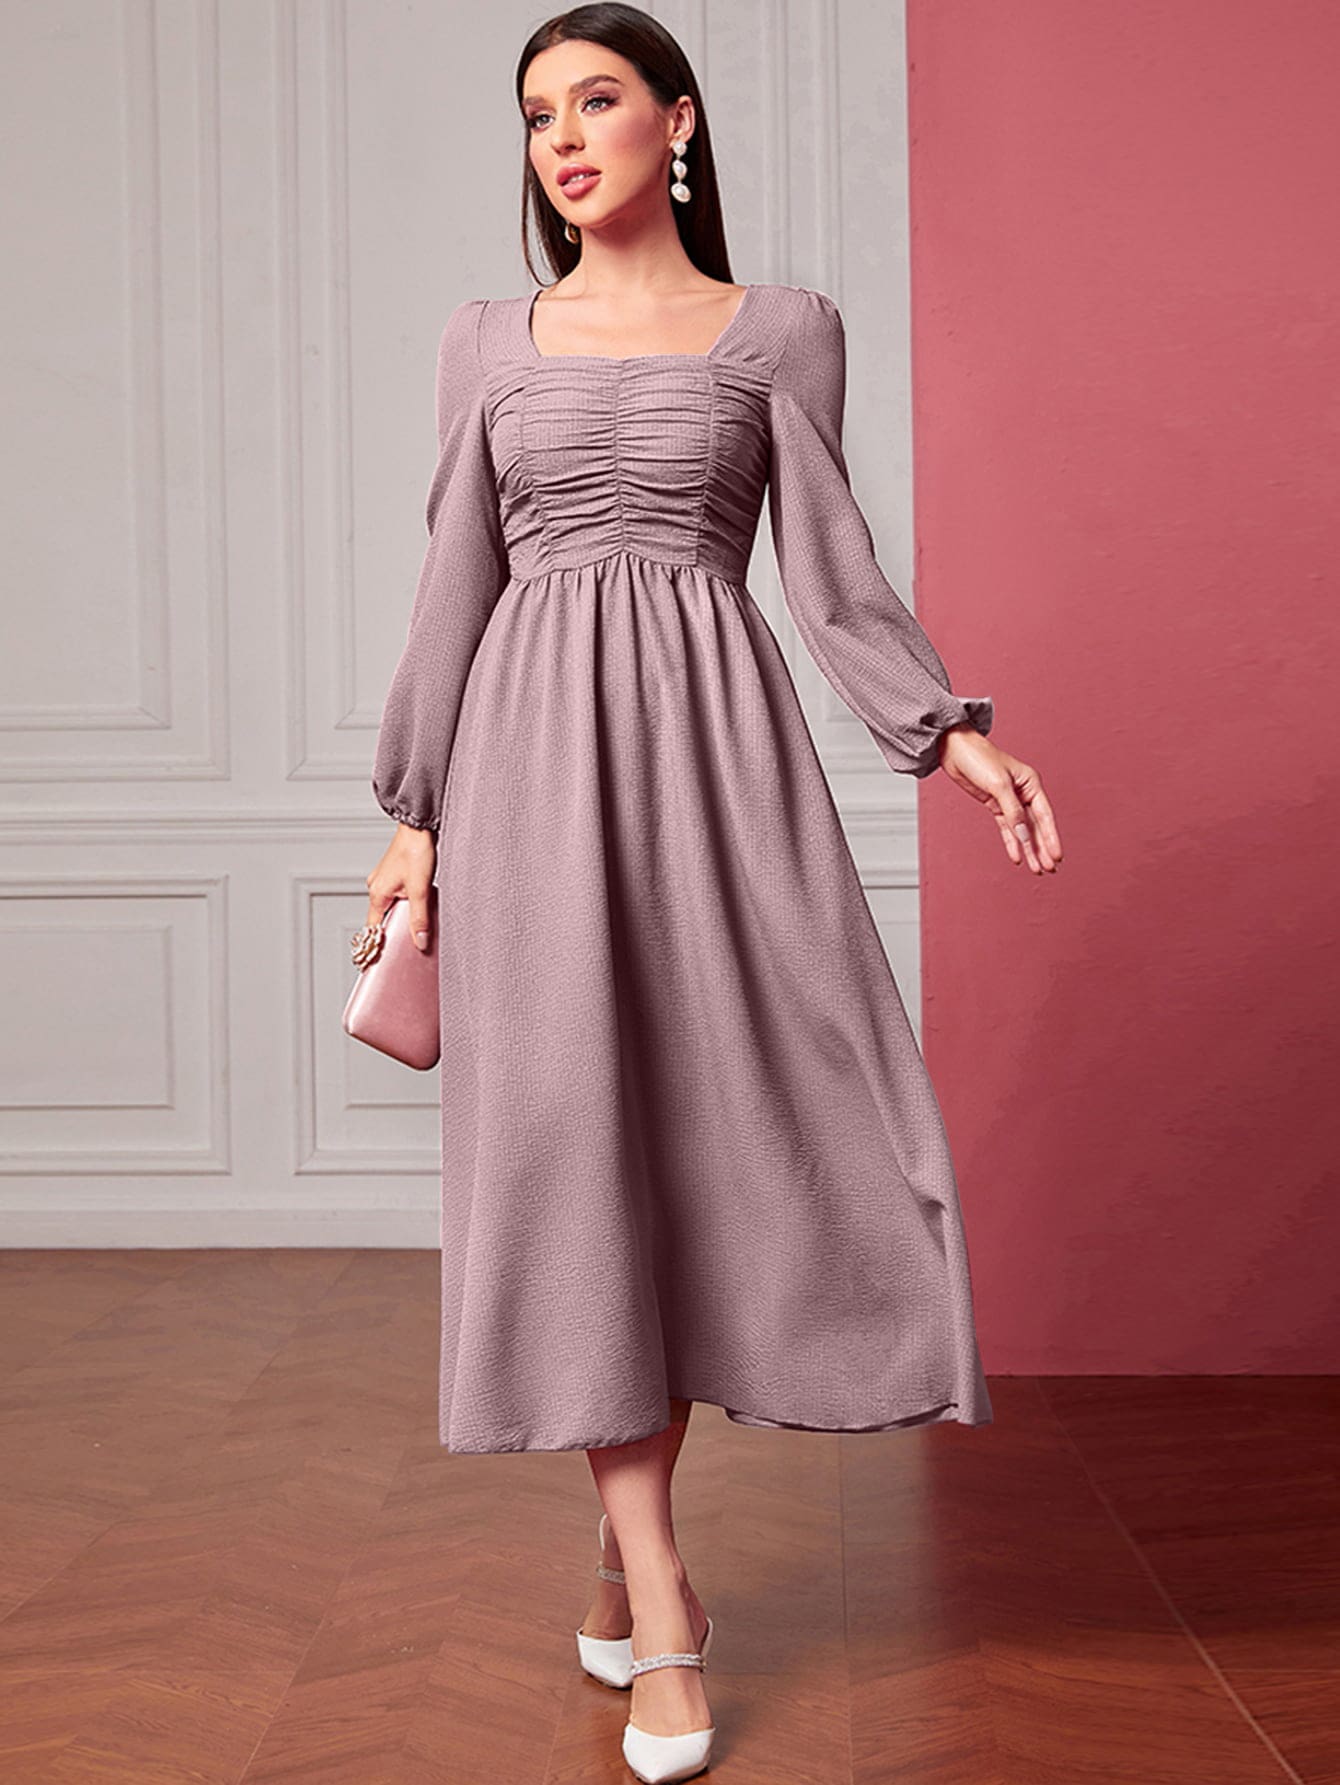 SHEIN Modely Square Neck Ruched Lantern Sleeve Dress